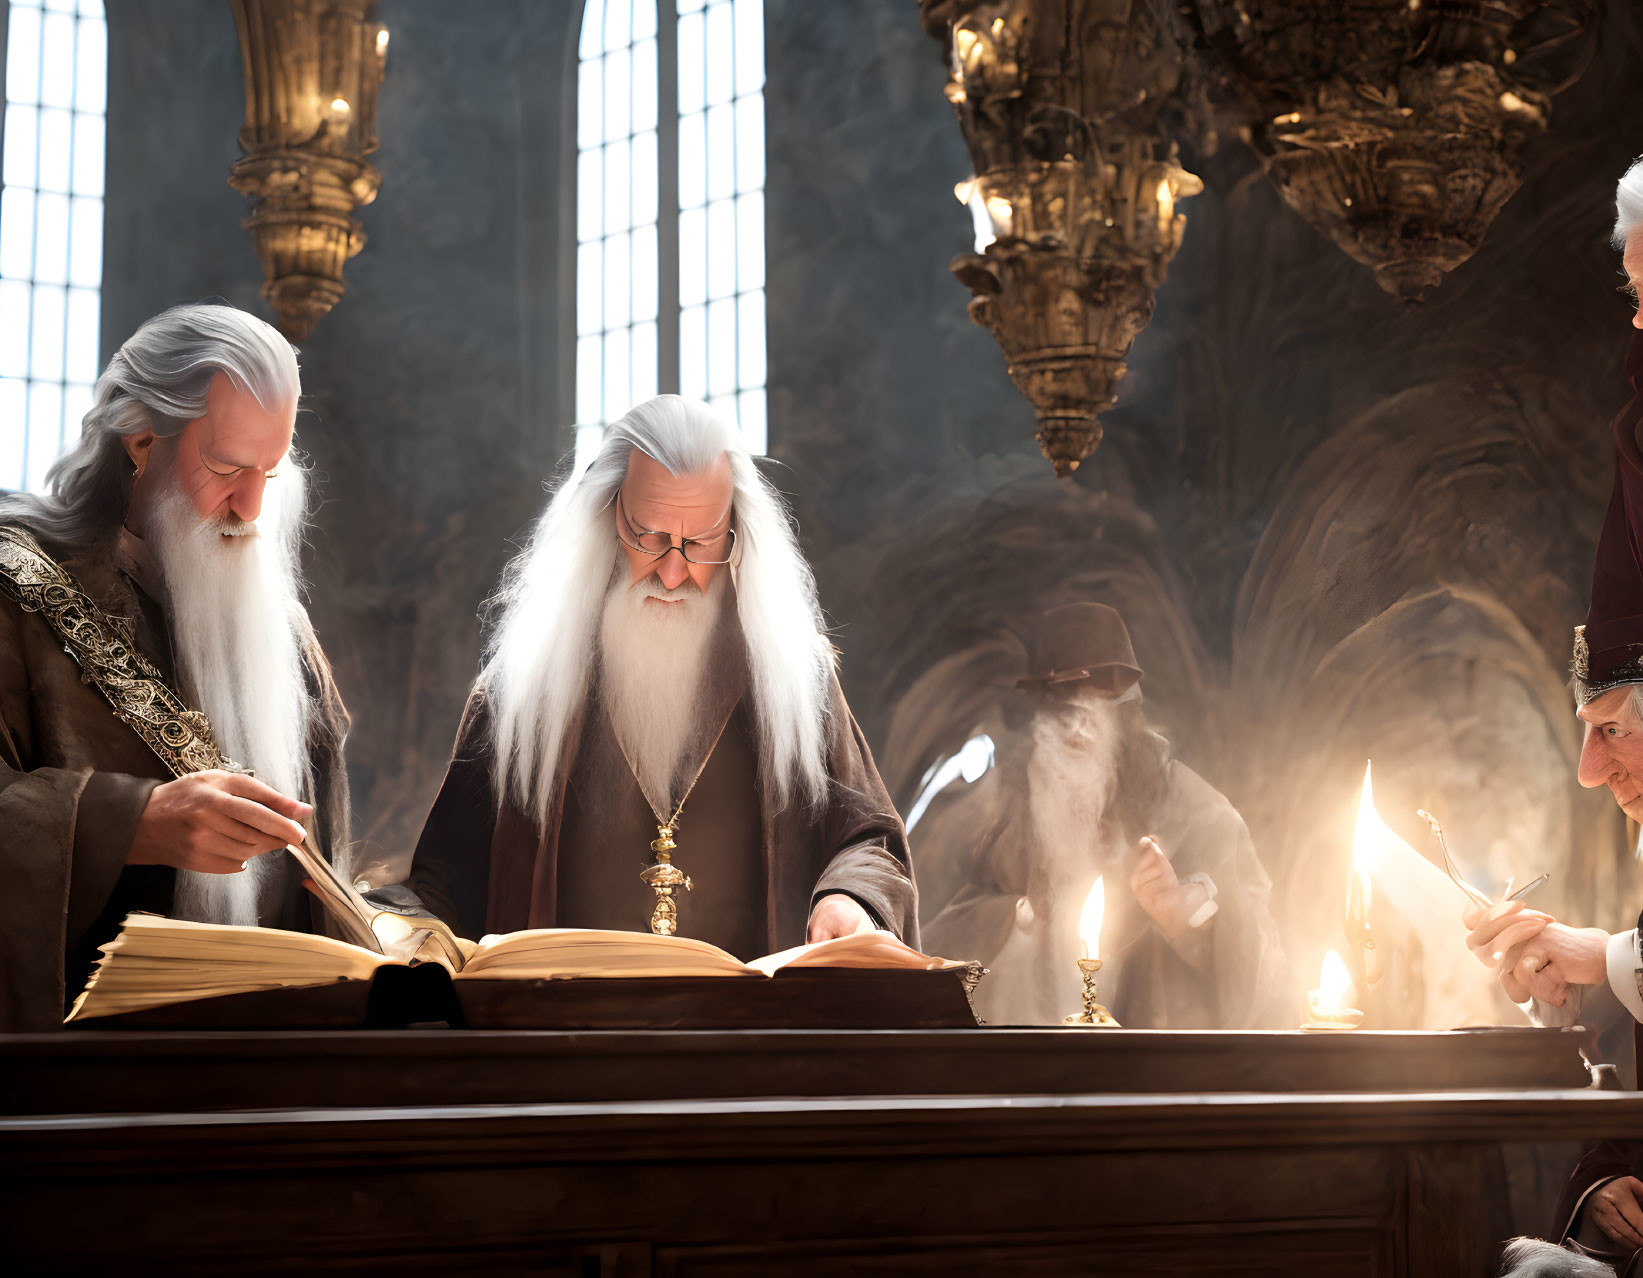 Gandalf and Merlin are Writing a Spellbook